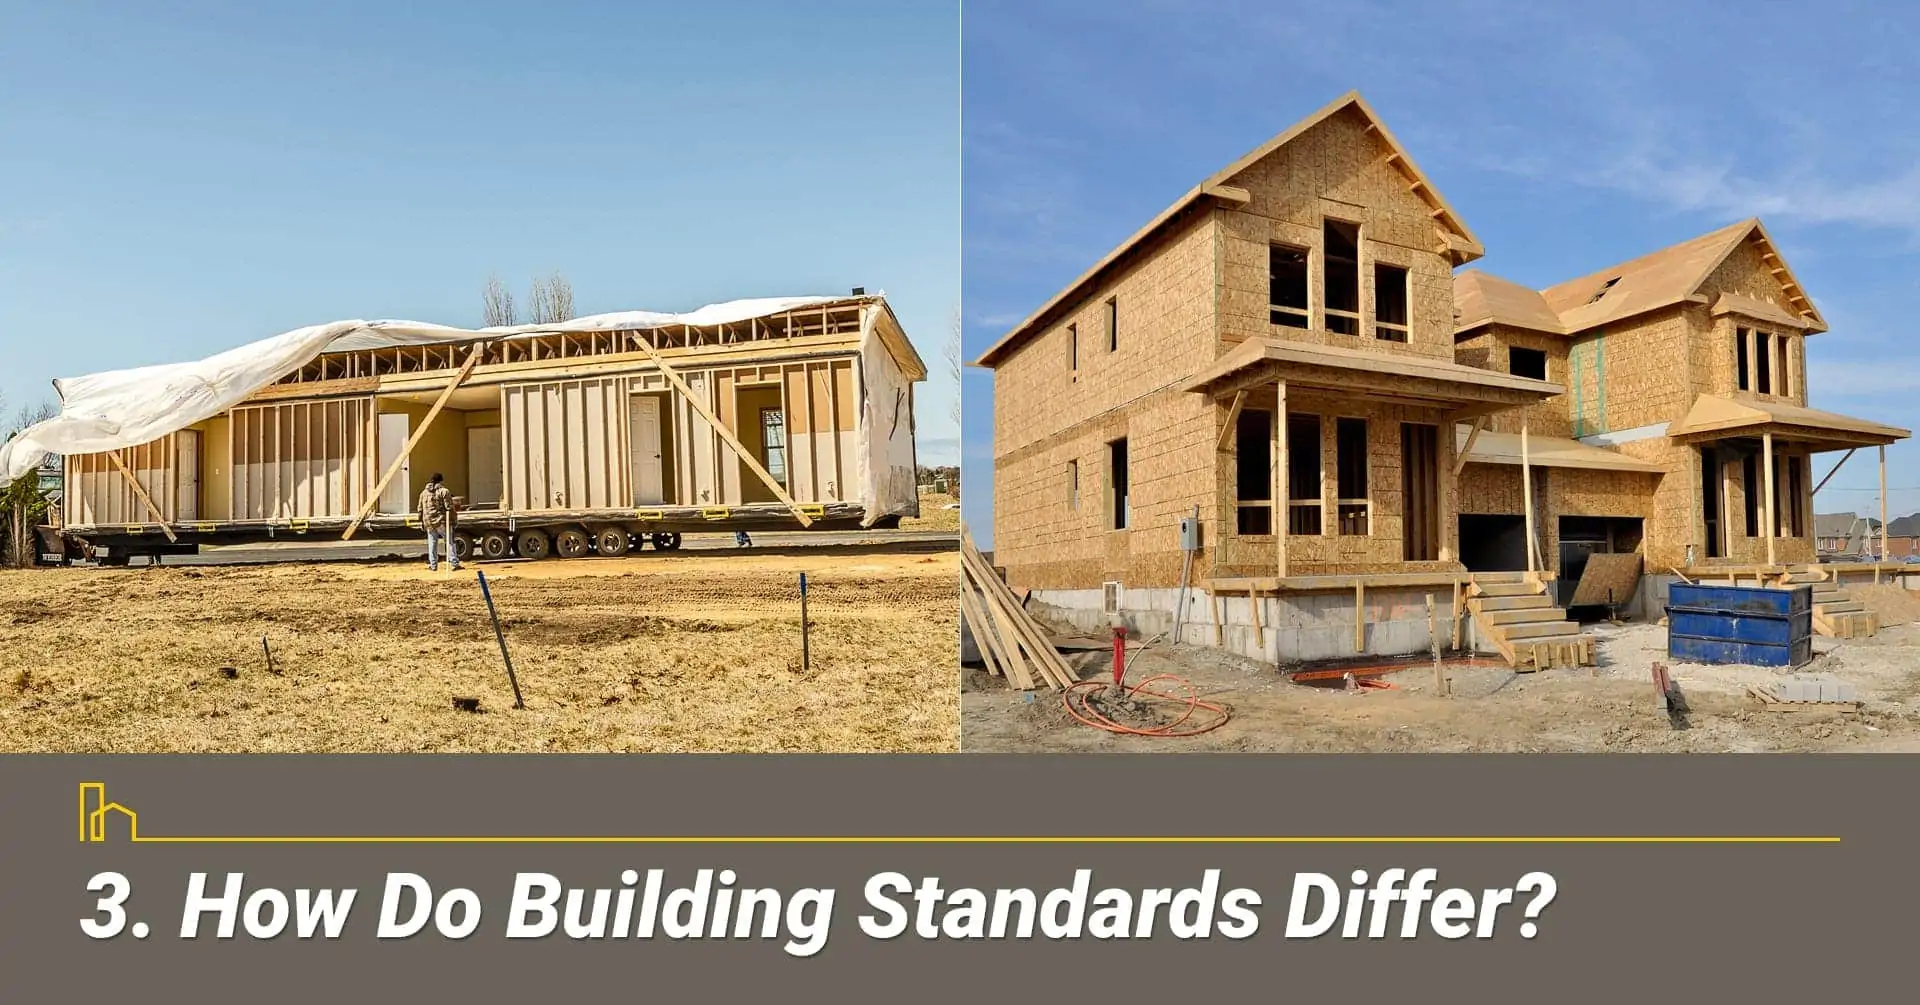 How Do Building Standards Differ? standards for site-built and manufactured homes